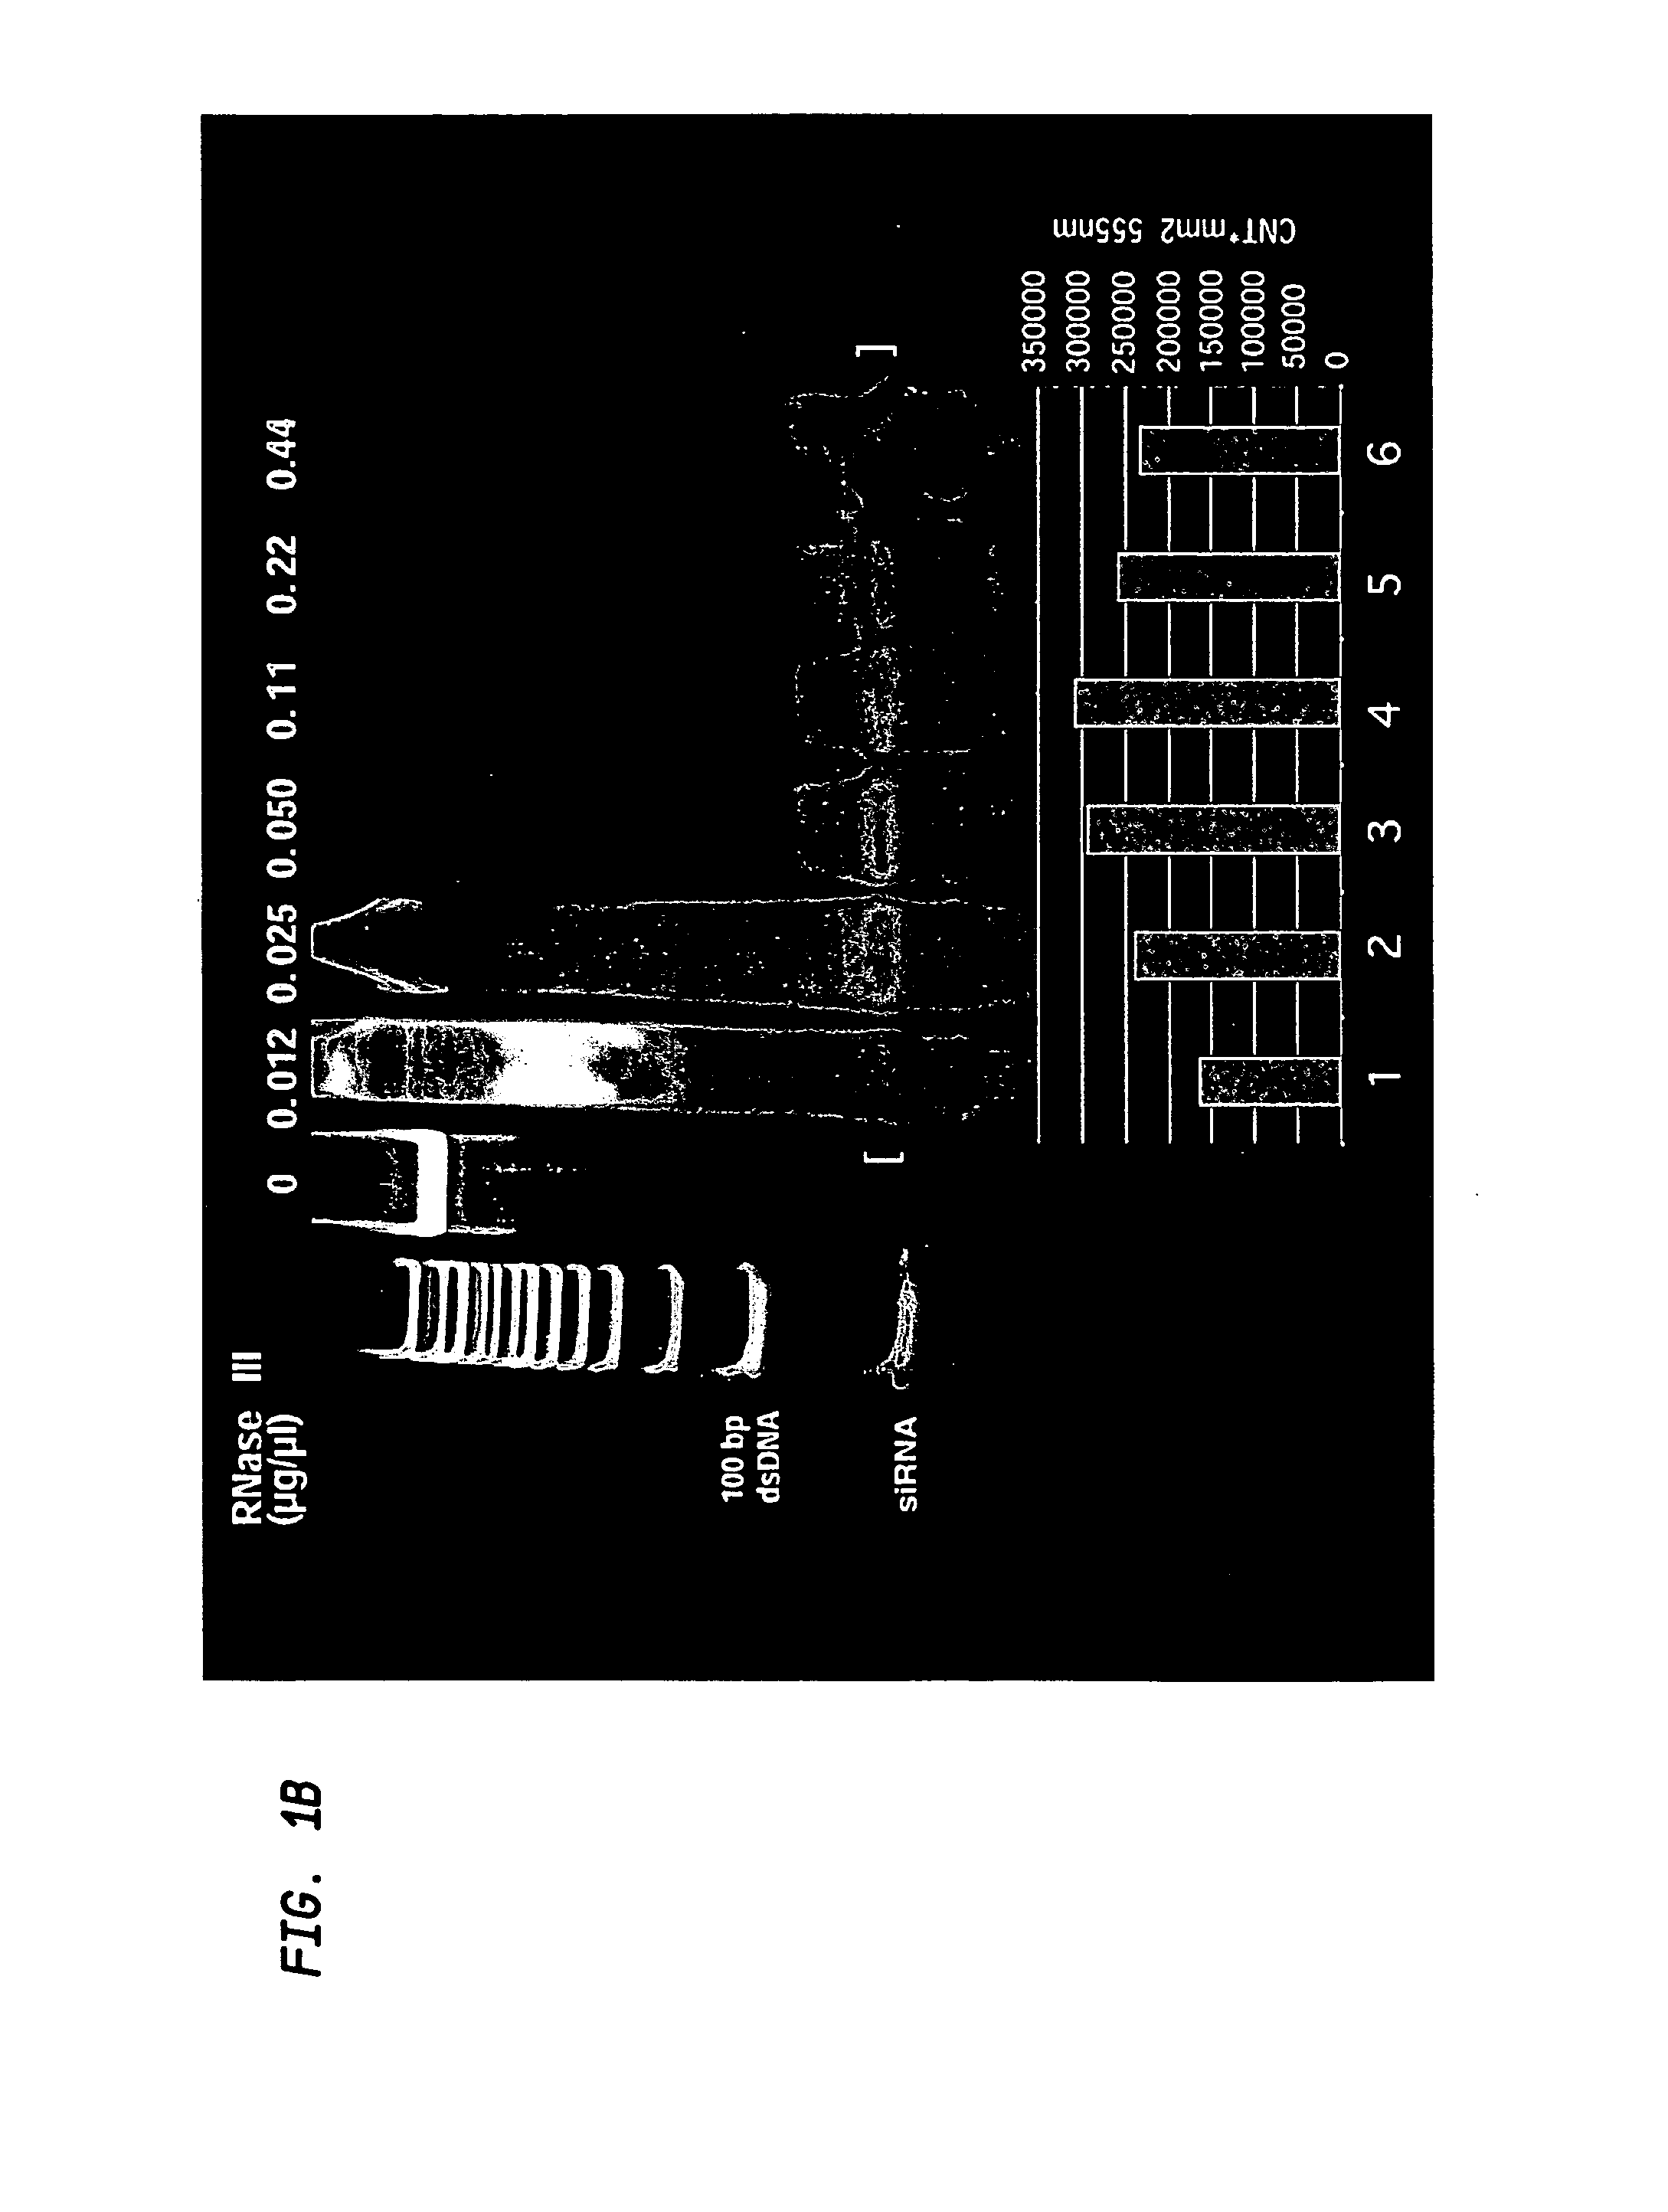 Methods and compositions relating to gene silencing